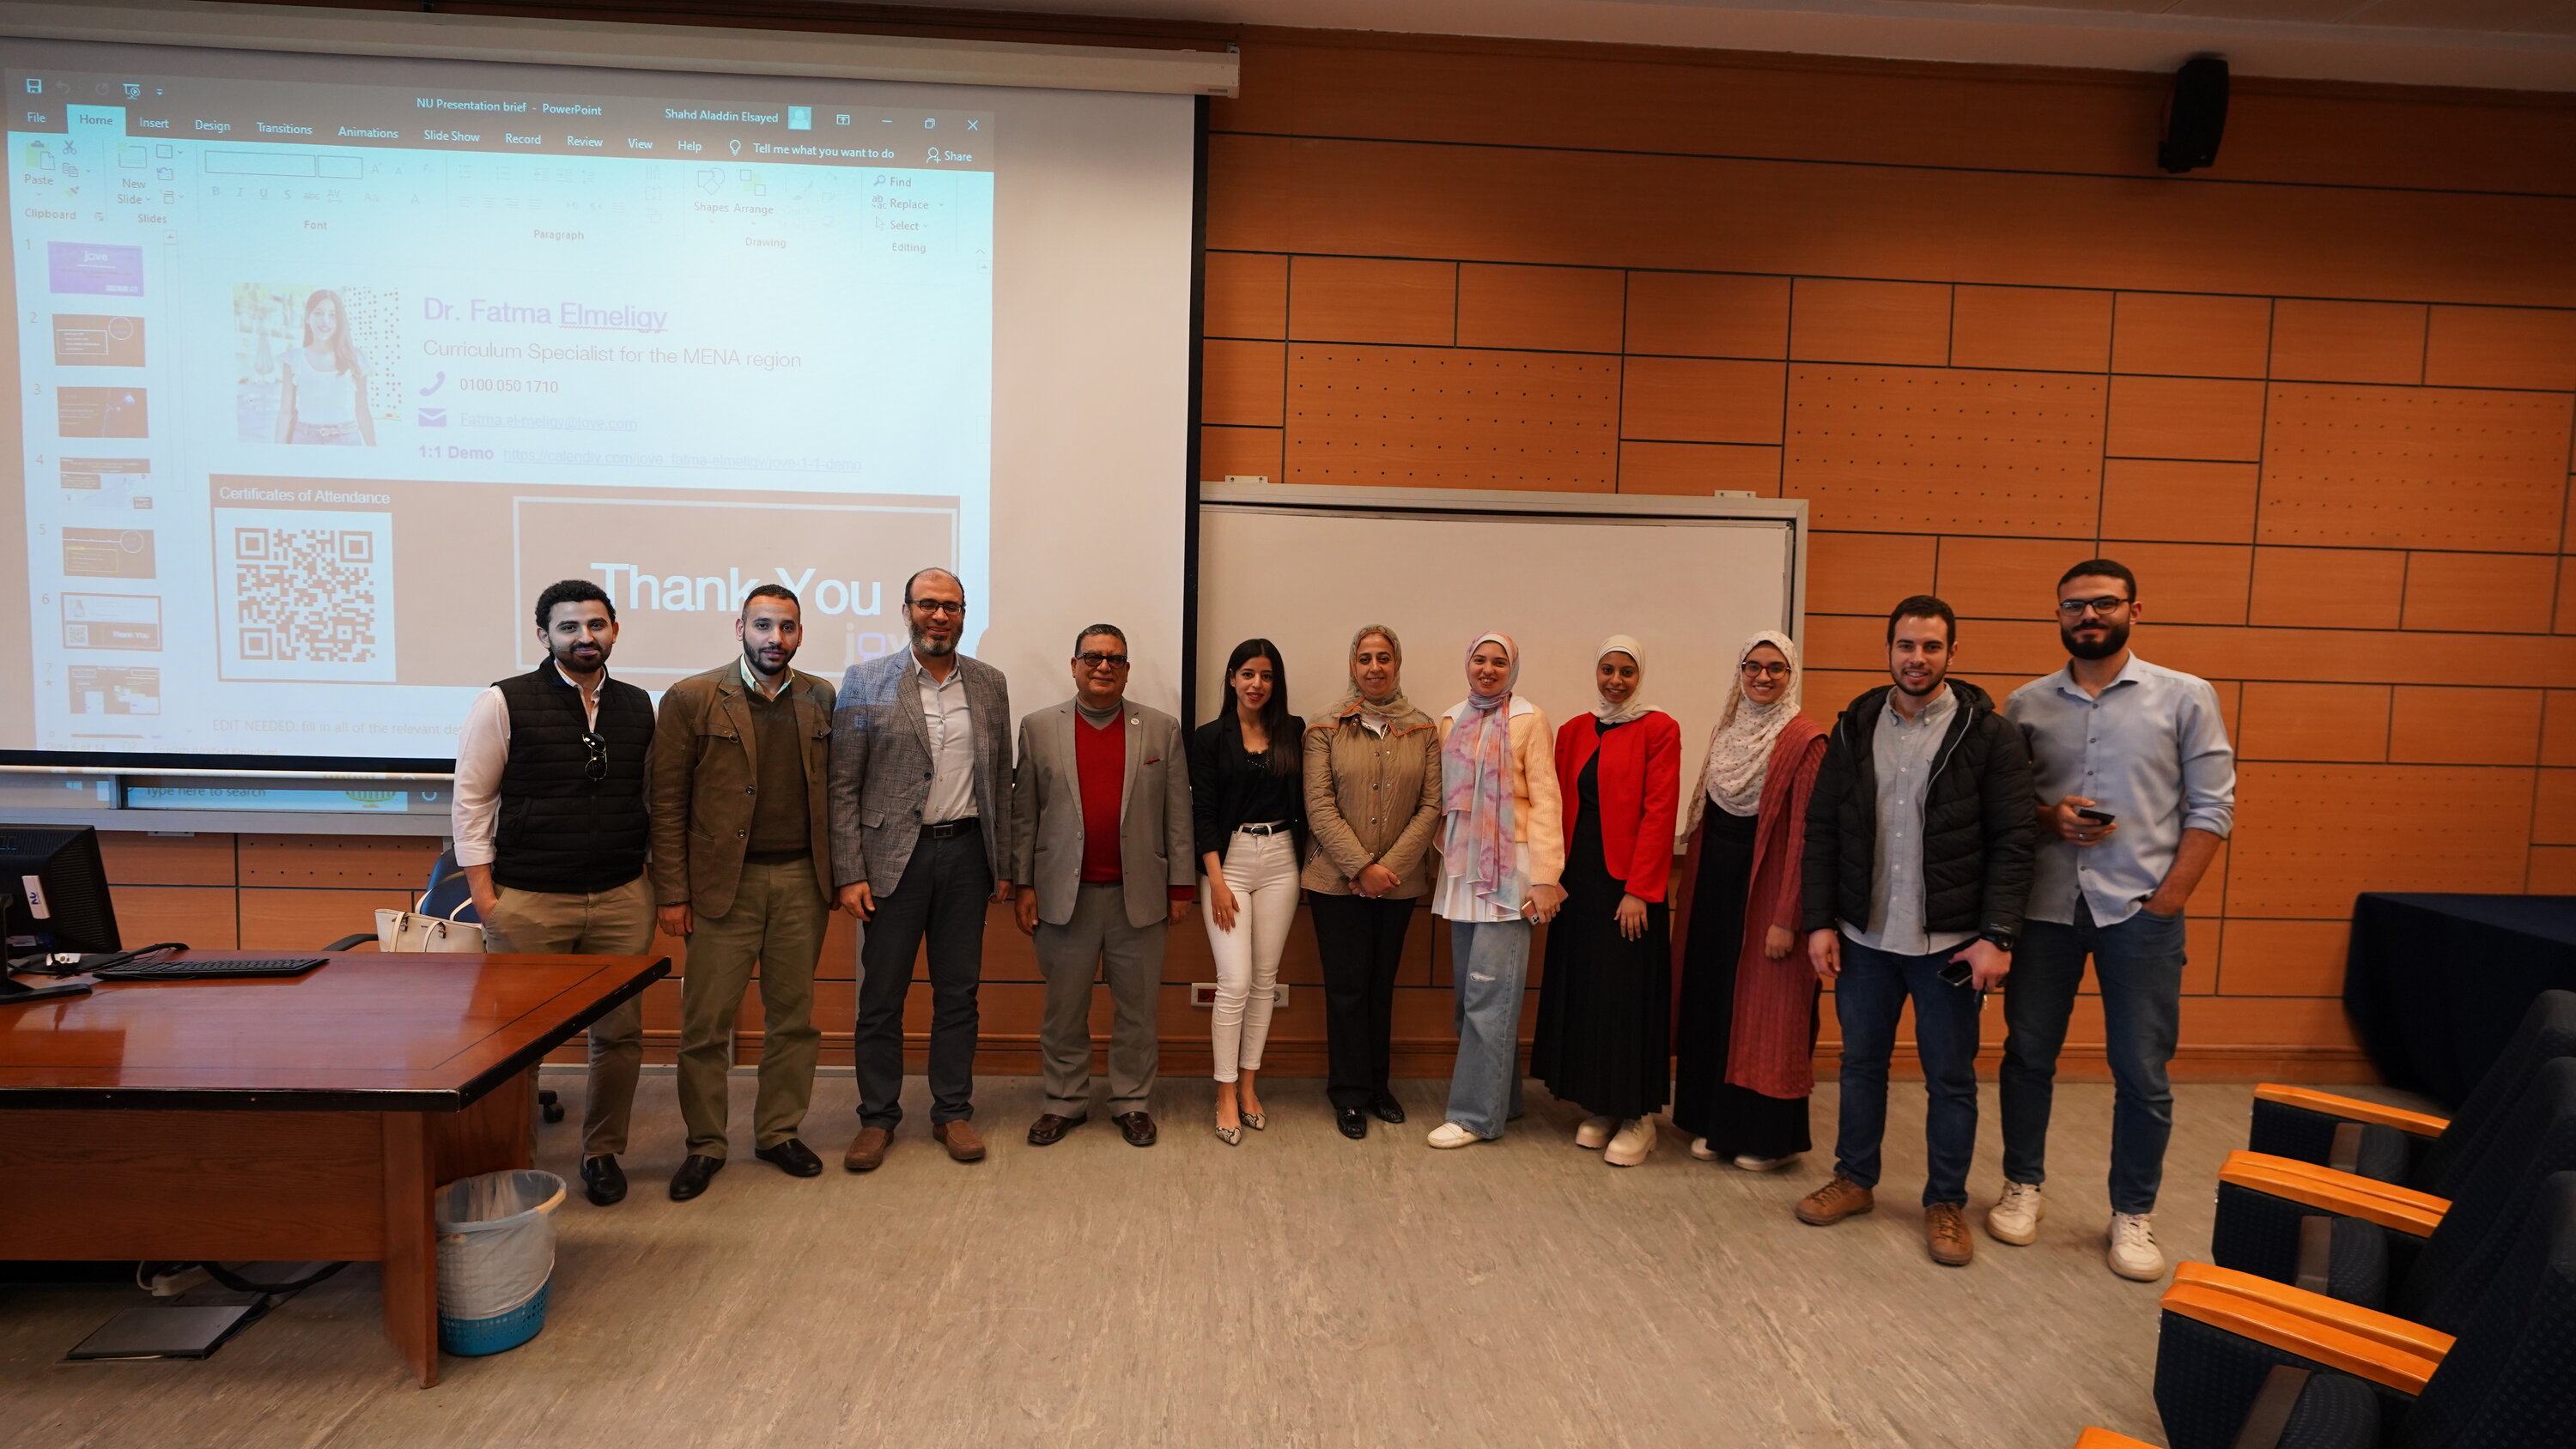 The Accelerate your Scientific Research and Education through JoVE workshop at school of engineering nile university 